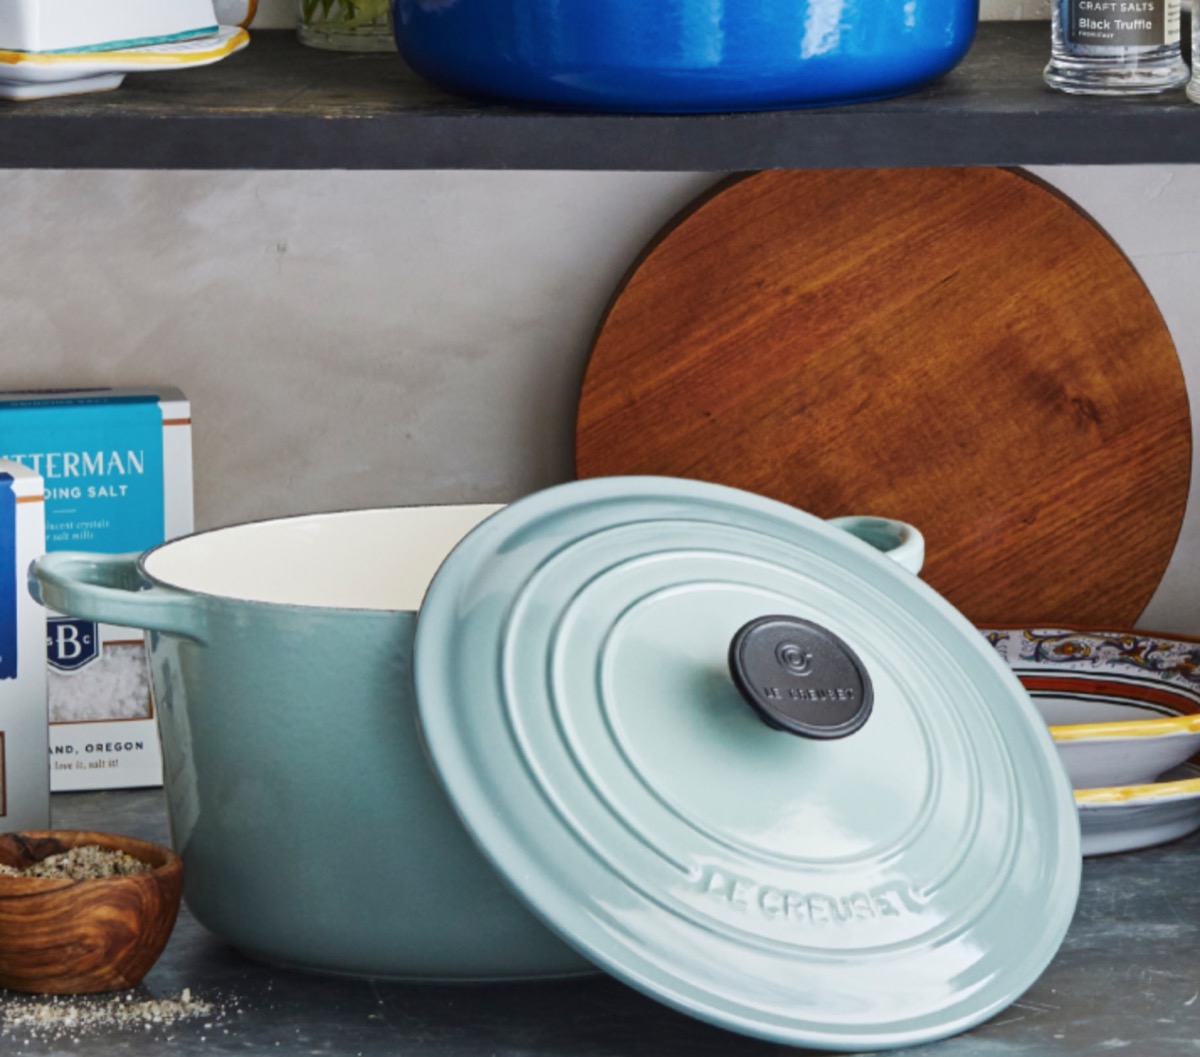 blue ceramic dutch oven on kitchen countertop with brown cutting board in background